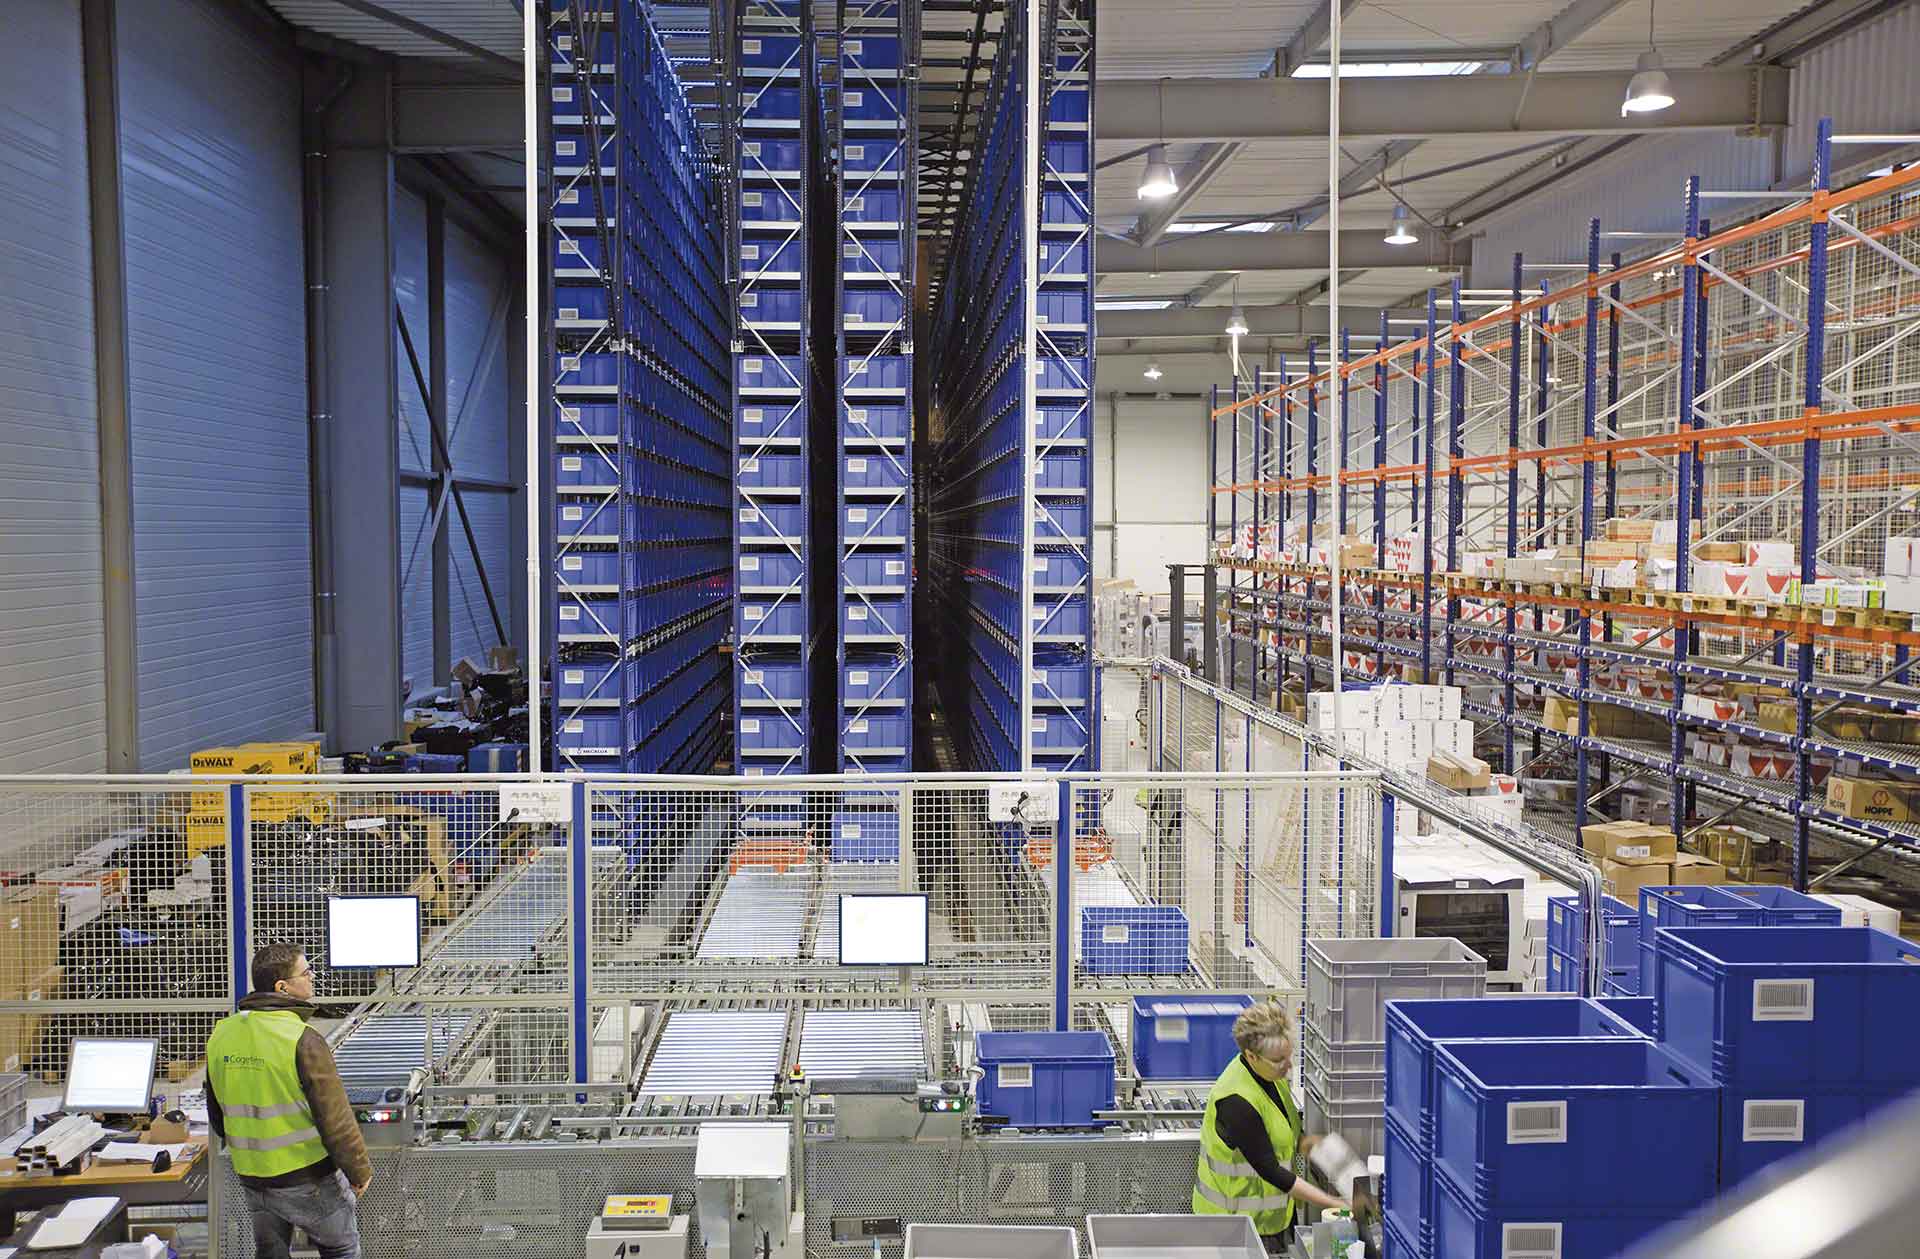 Warehouse automation is key for increasing efficiency in manufacturing logistics